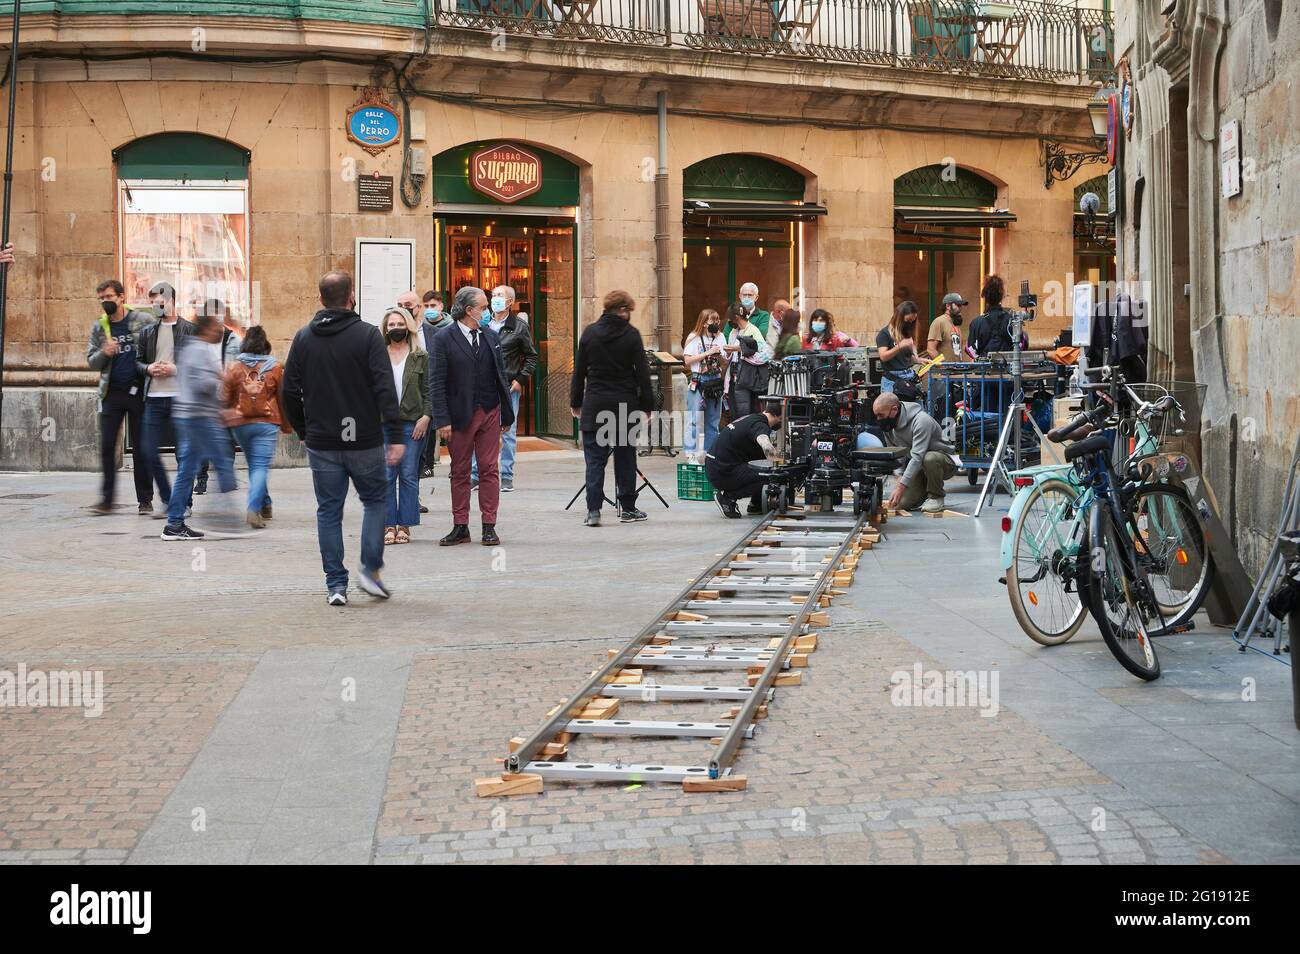 Filming of the tv series for Netflix 'La vida Padre' in old town, Bilbao, Biscay, Basque Country, Euskadi, Euskal Herria, Spain, Europe Stock Photo